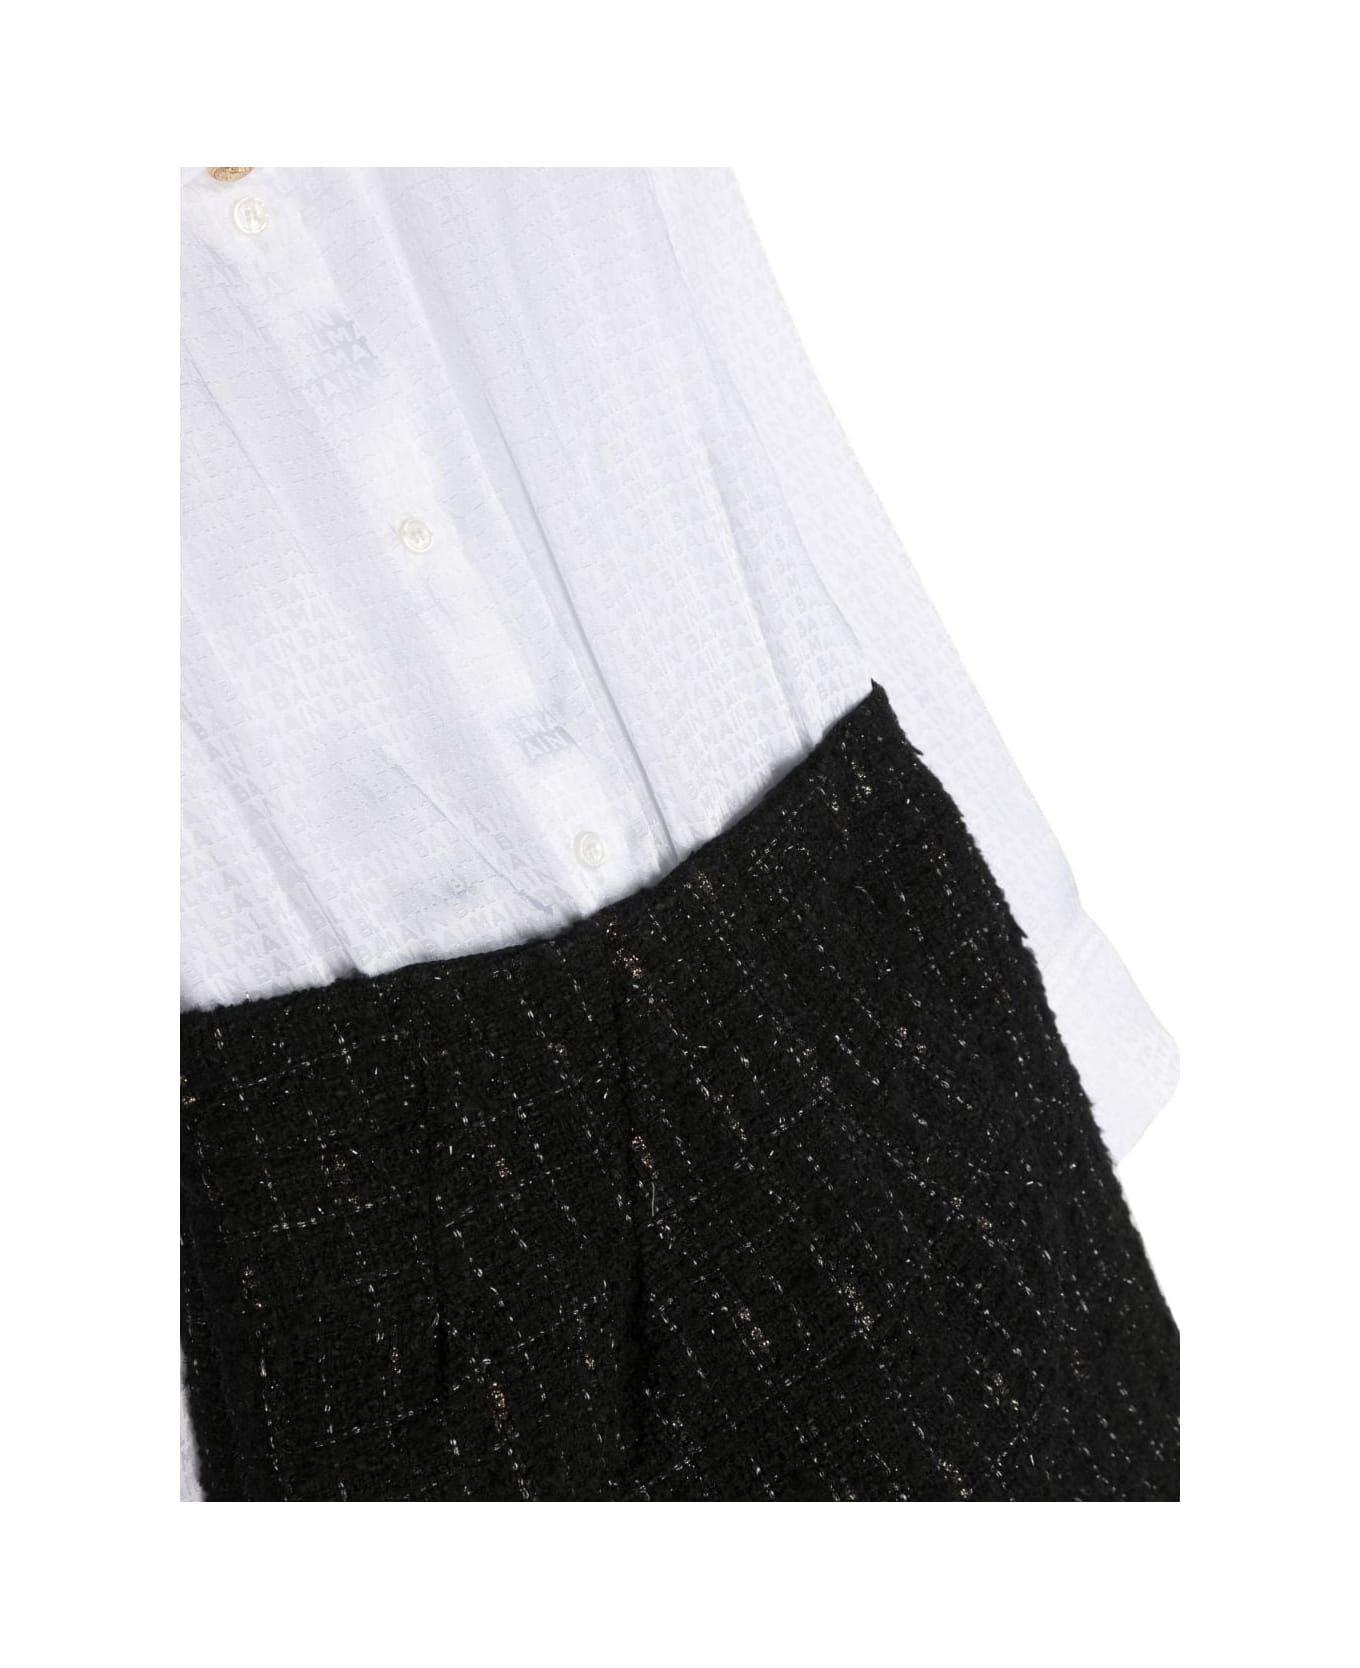 Balmain Black And White Cotton And Tweed Jumpsuit - White/black